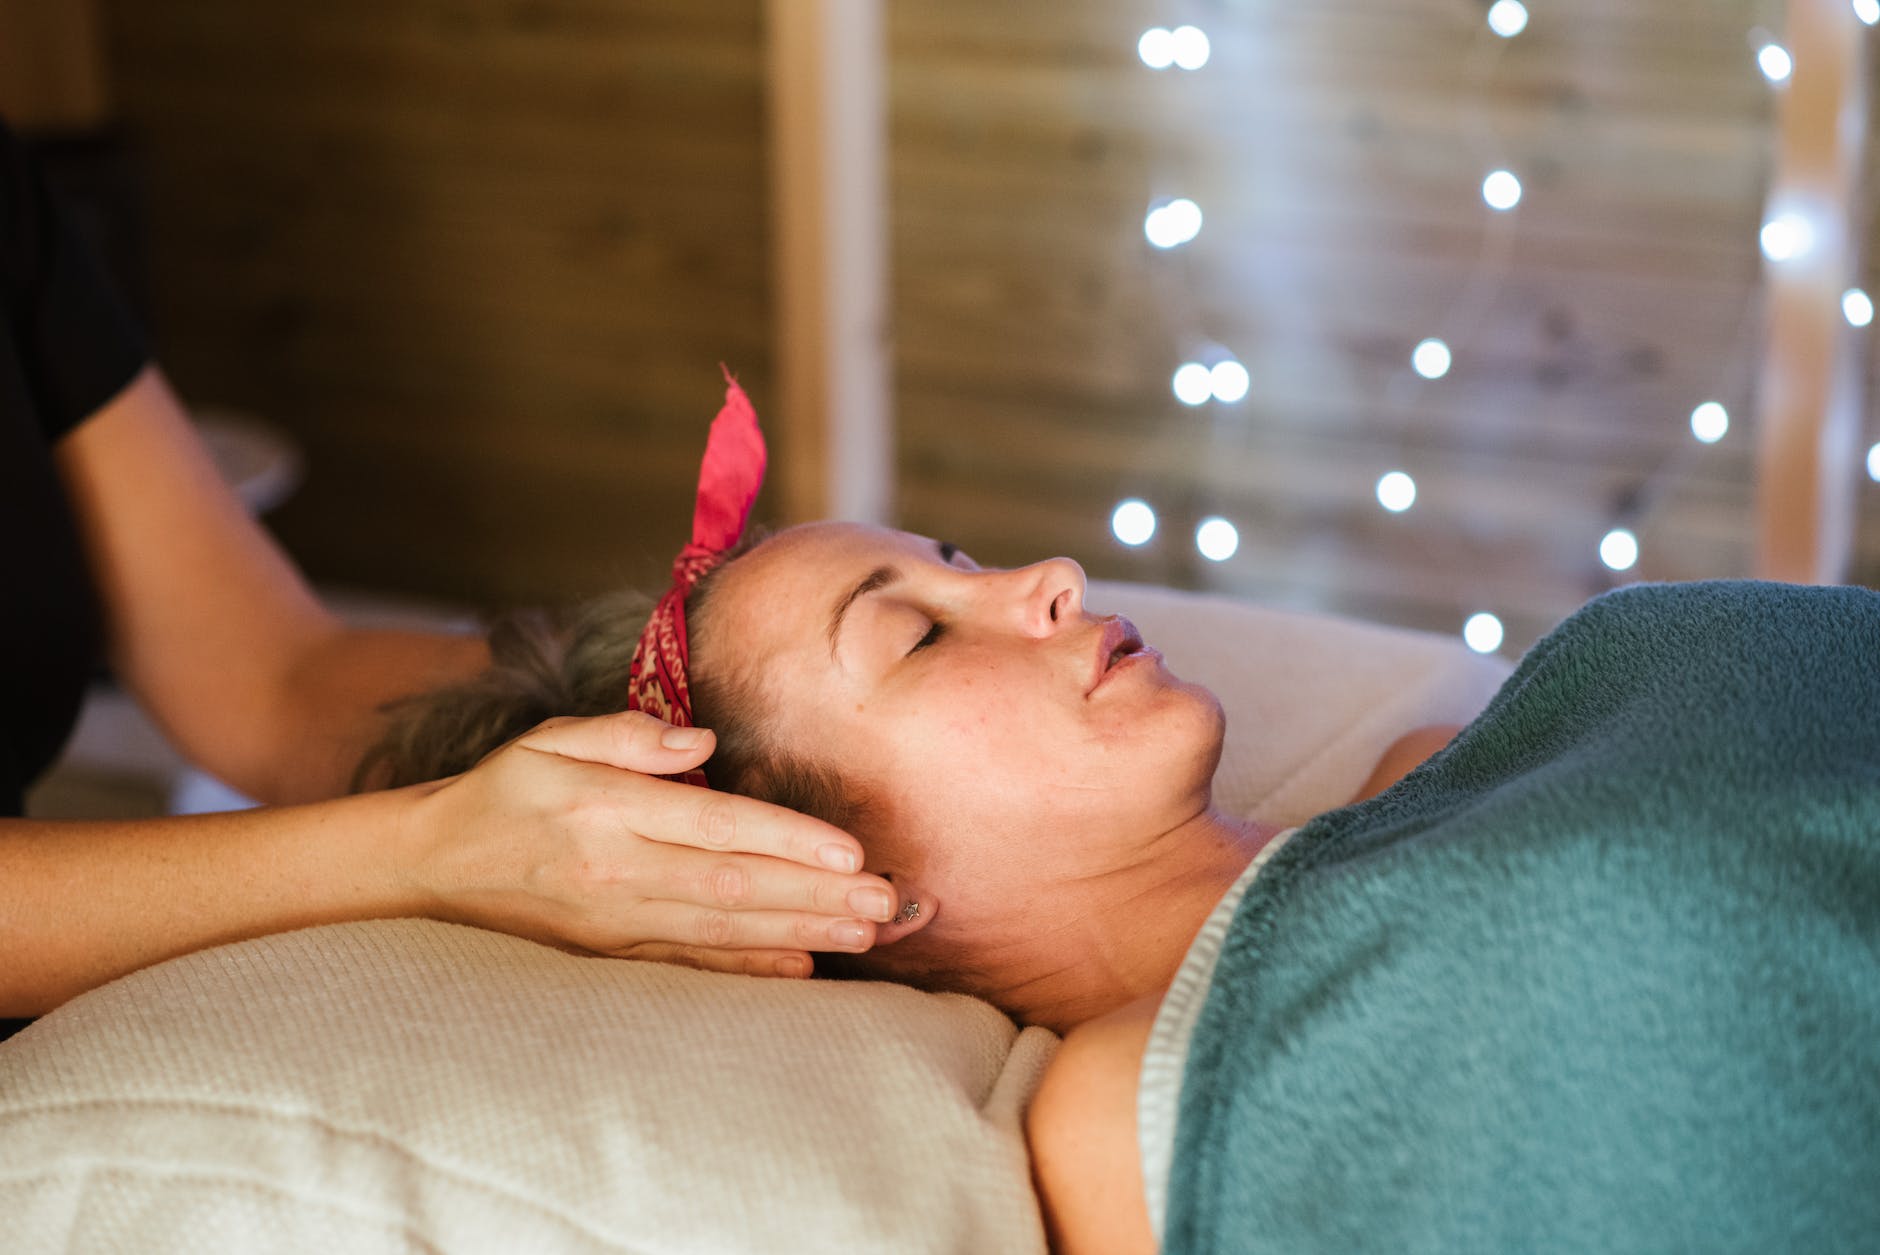 What can I expect during a Reiki session?